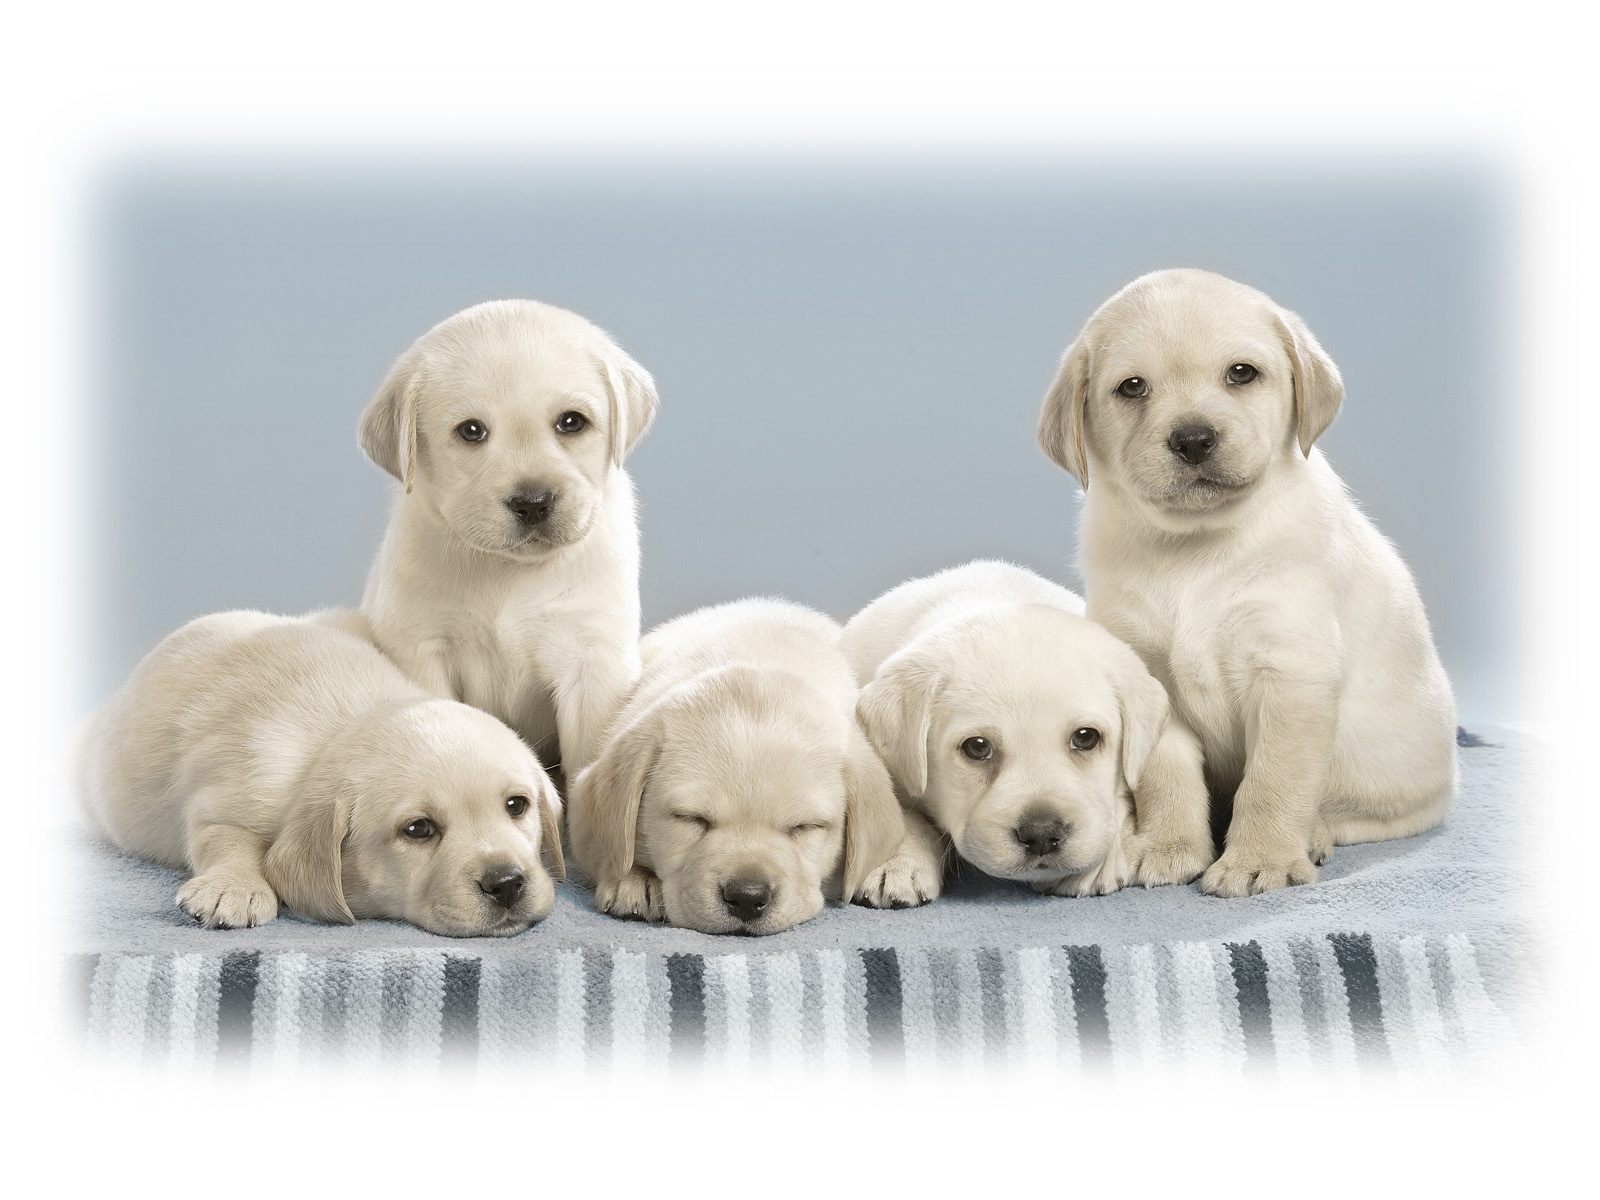 Puppies wallpapers free download